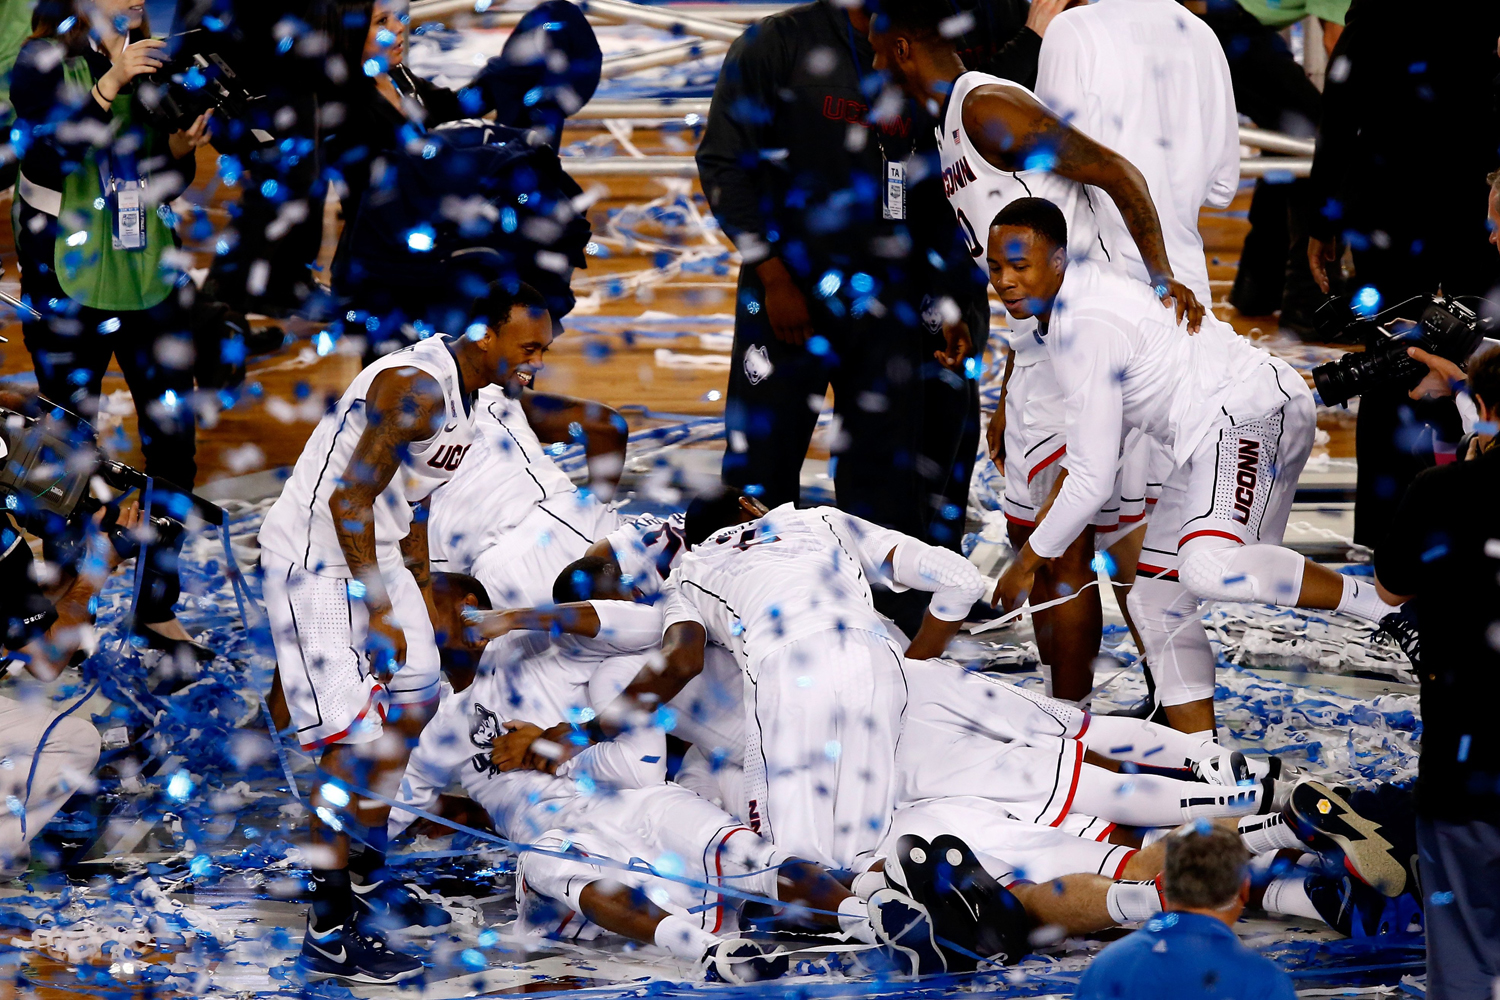 The Connecticut Huskies celebrate after defeating the Kentucky Wildcats 60-54 in the NCAA Men's Final Four Championship at the AT&T Stadium on April 7, 2014 in Arlington, Texas.